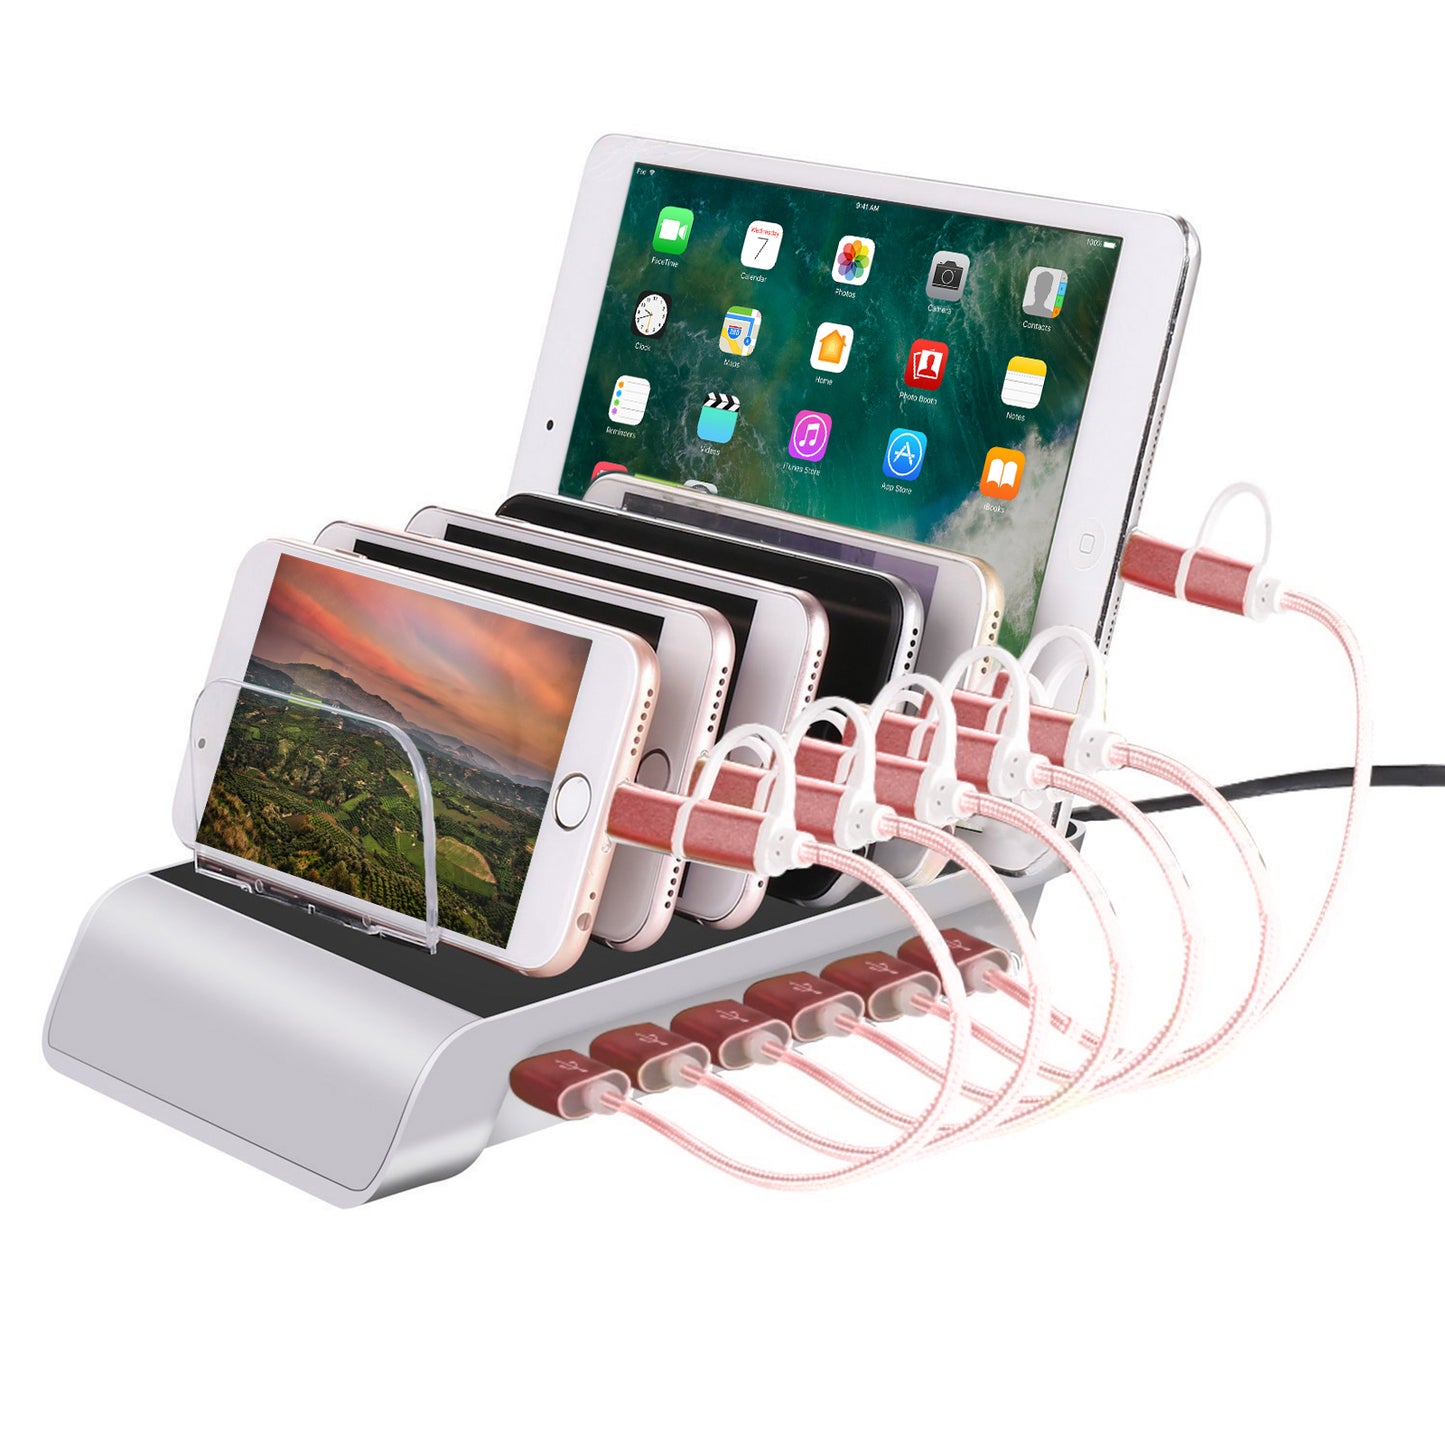 Trexonic Trexonic 10.2A 6-Port USB Charging Station with 6 Device Slots, Silver